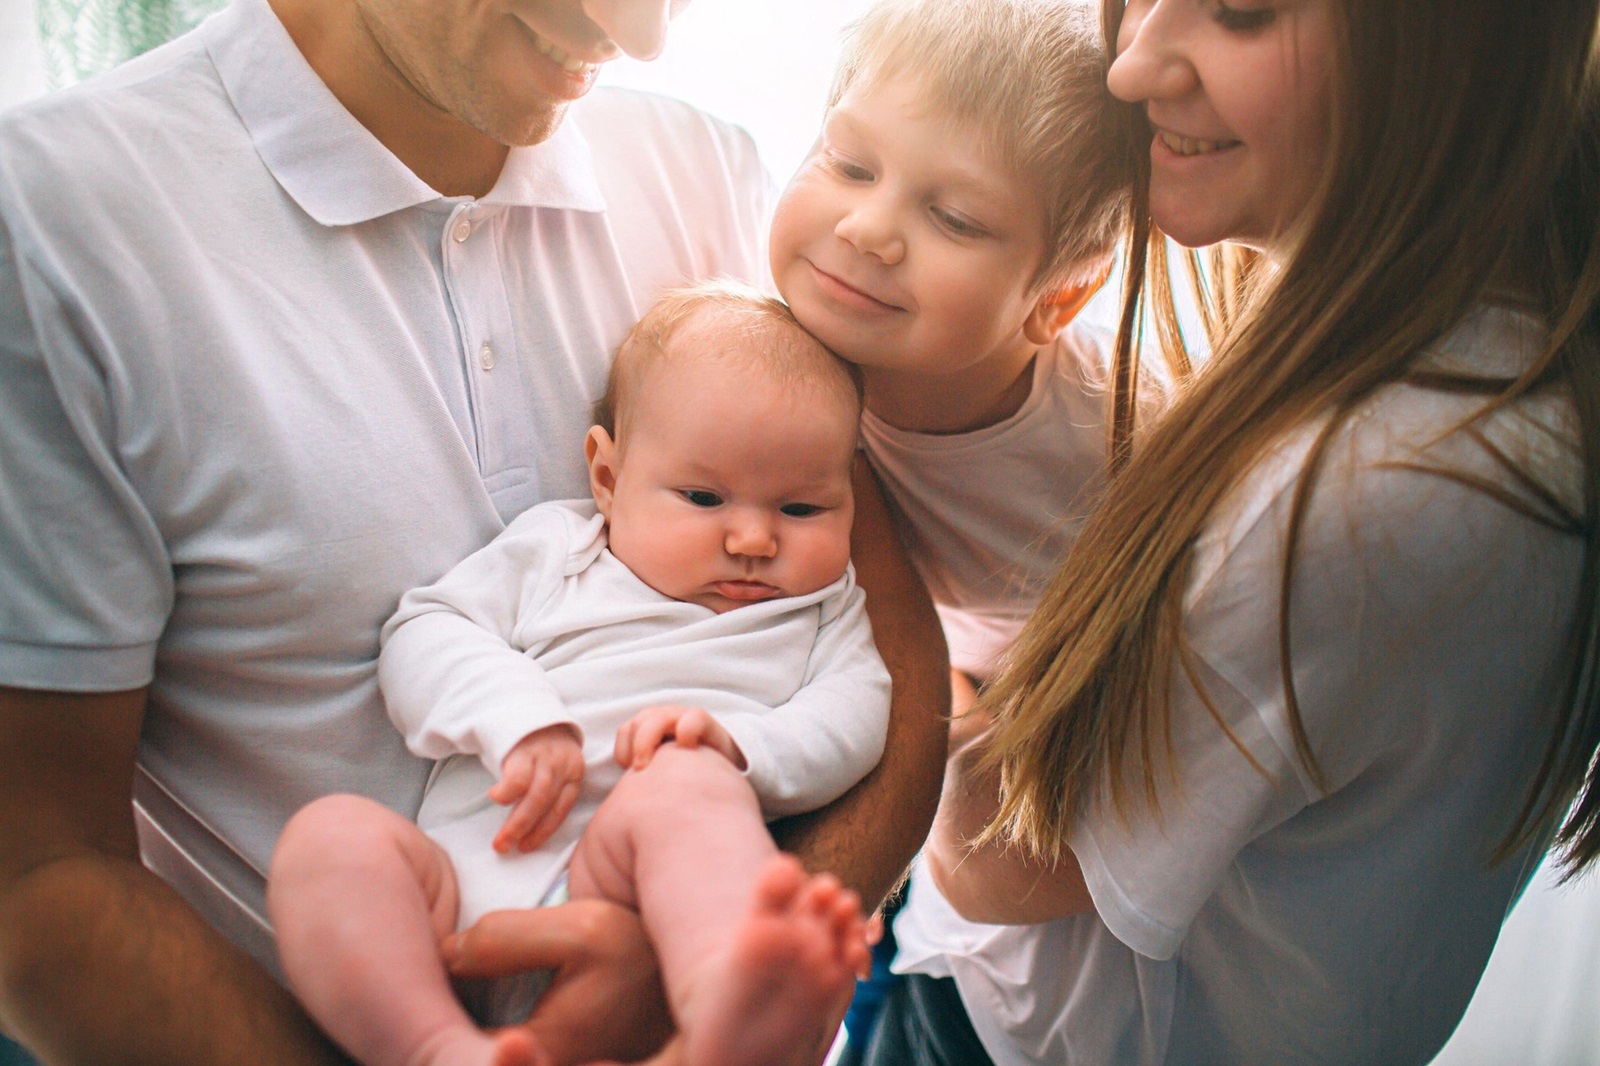 Mother and father are holding a baby in their arms. Big brother hugs his sister. Care and health. Happy young family.,Image: 516296696, License: Royalty-free, Restrictions: , Model Release: yes, Credit line: Vlad Dmytrenko / Alamy / Alamy / Profimedia